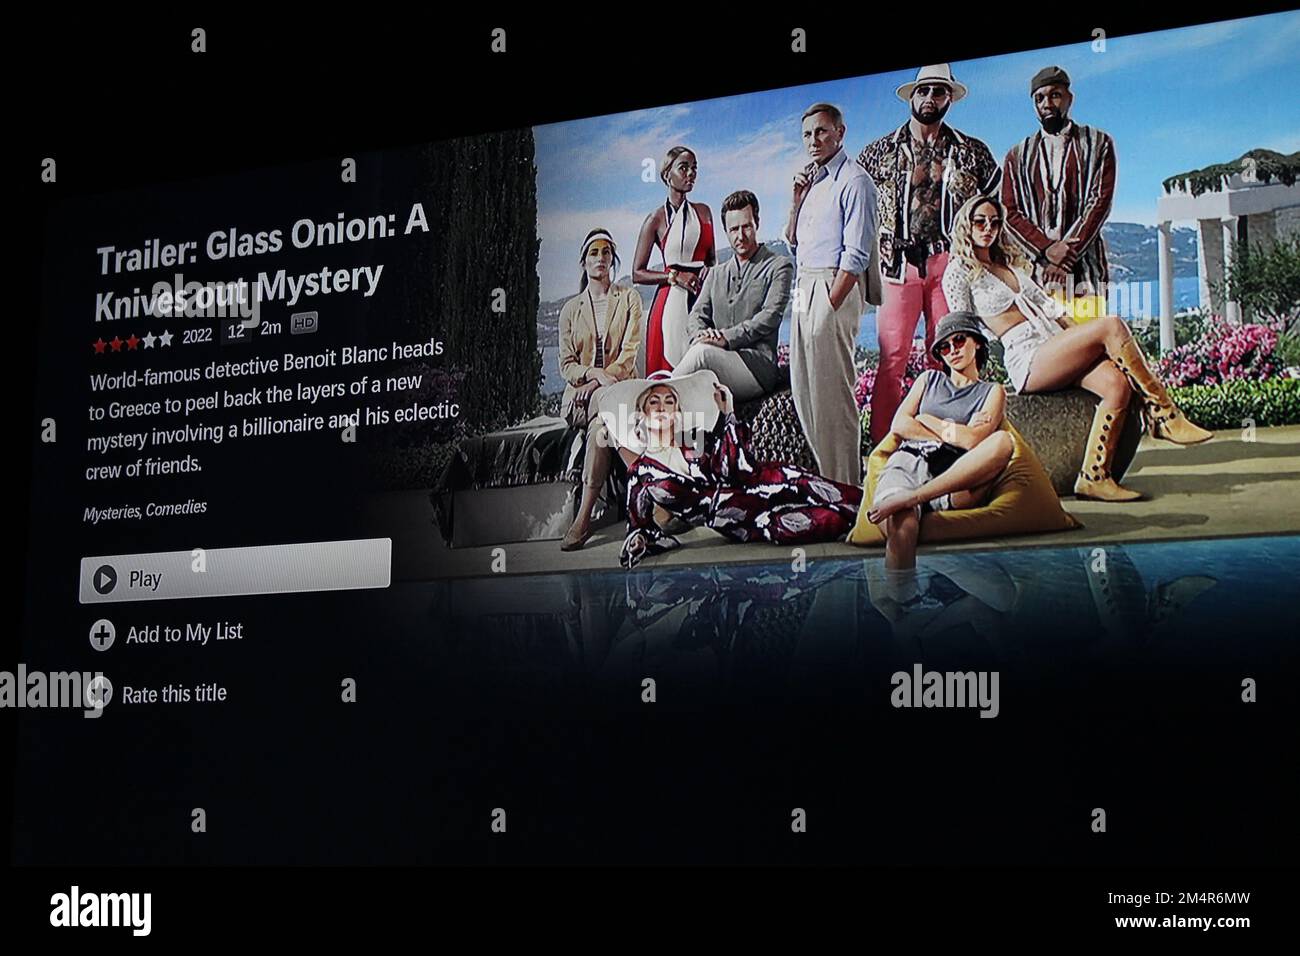 TV screen showing the Netflix page for the Glass Onion trailer, before the movie was available to stream at home on the platform Stock Photo